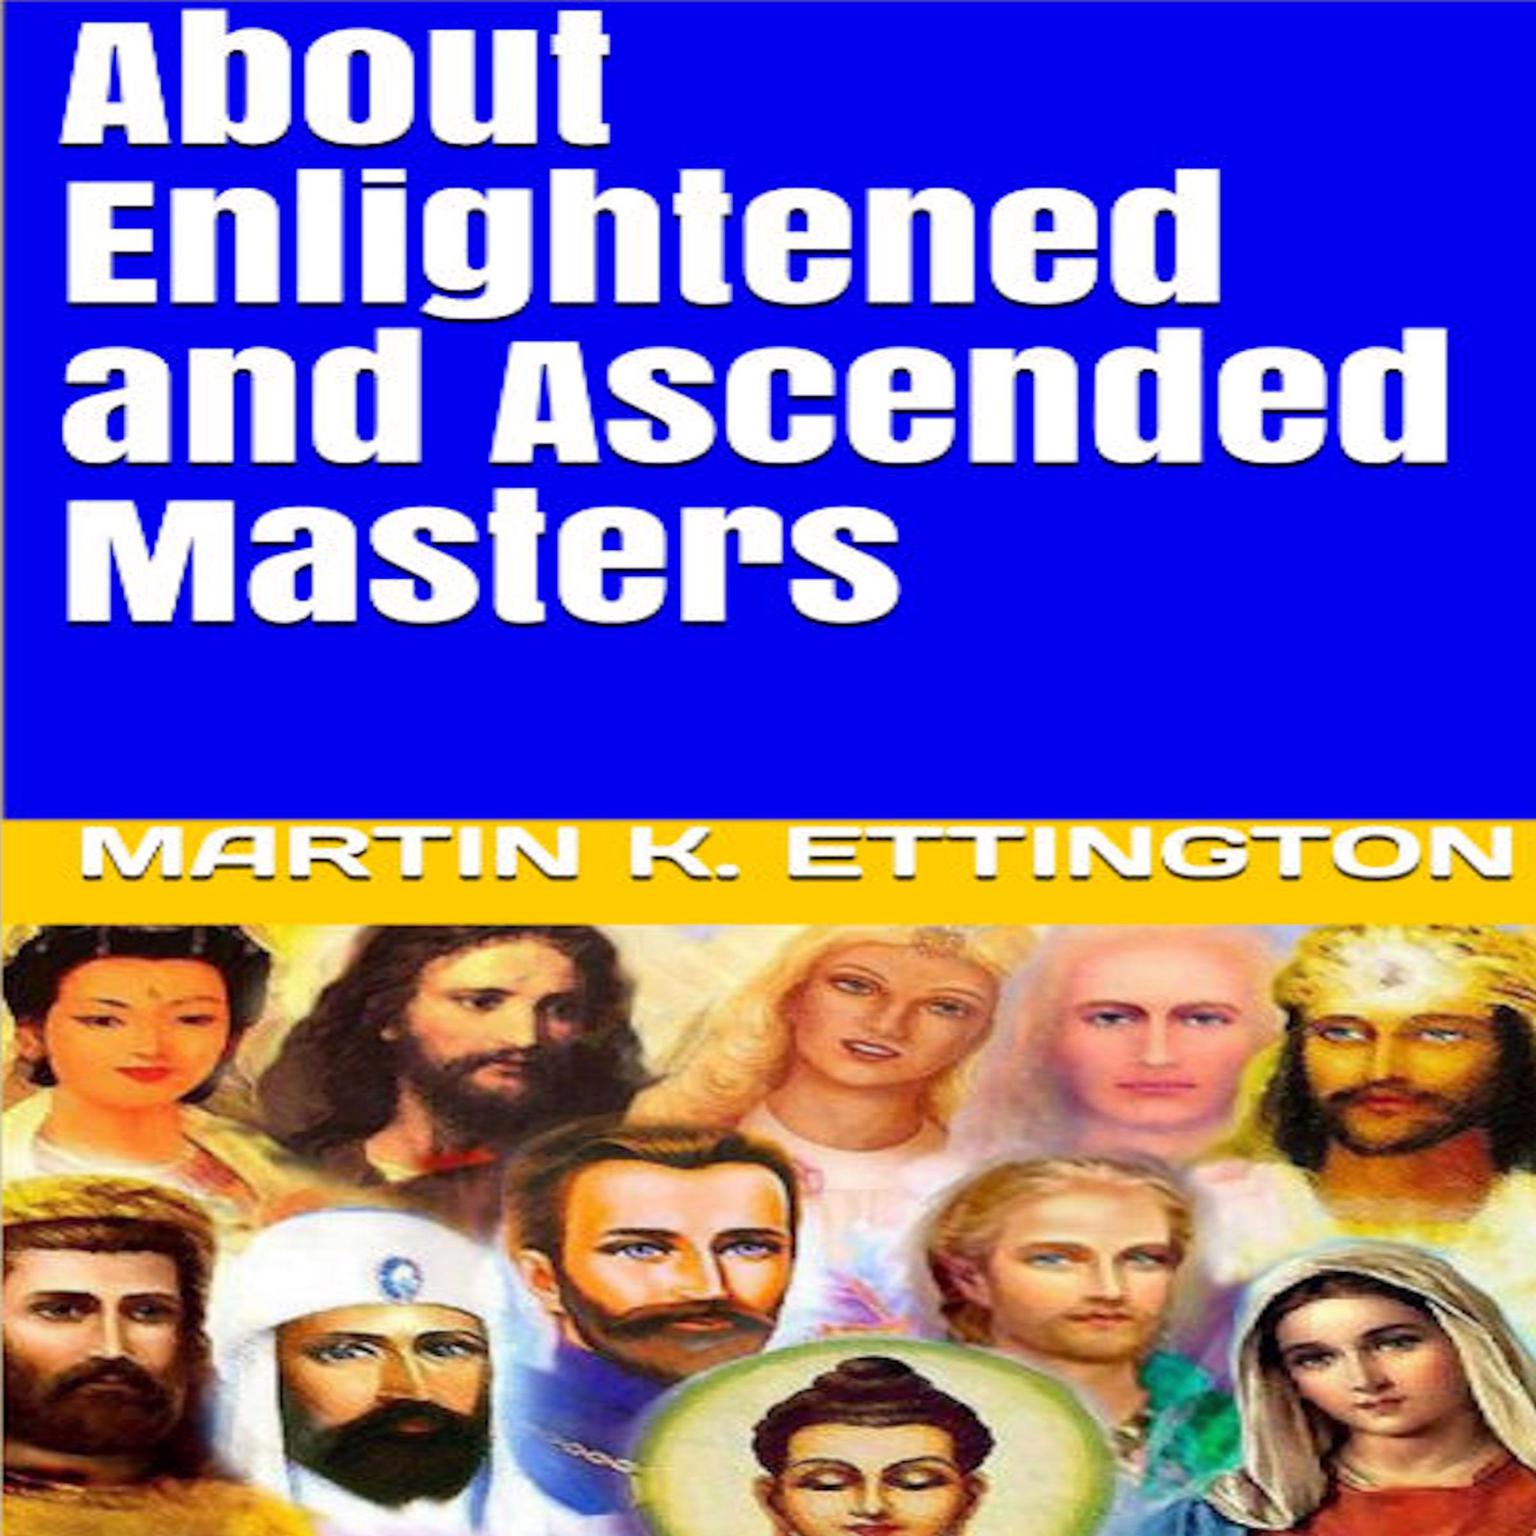 About Enlightened and Ascended Masters Audiobook, by Martin K. Ettington